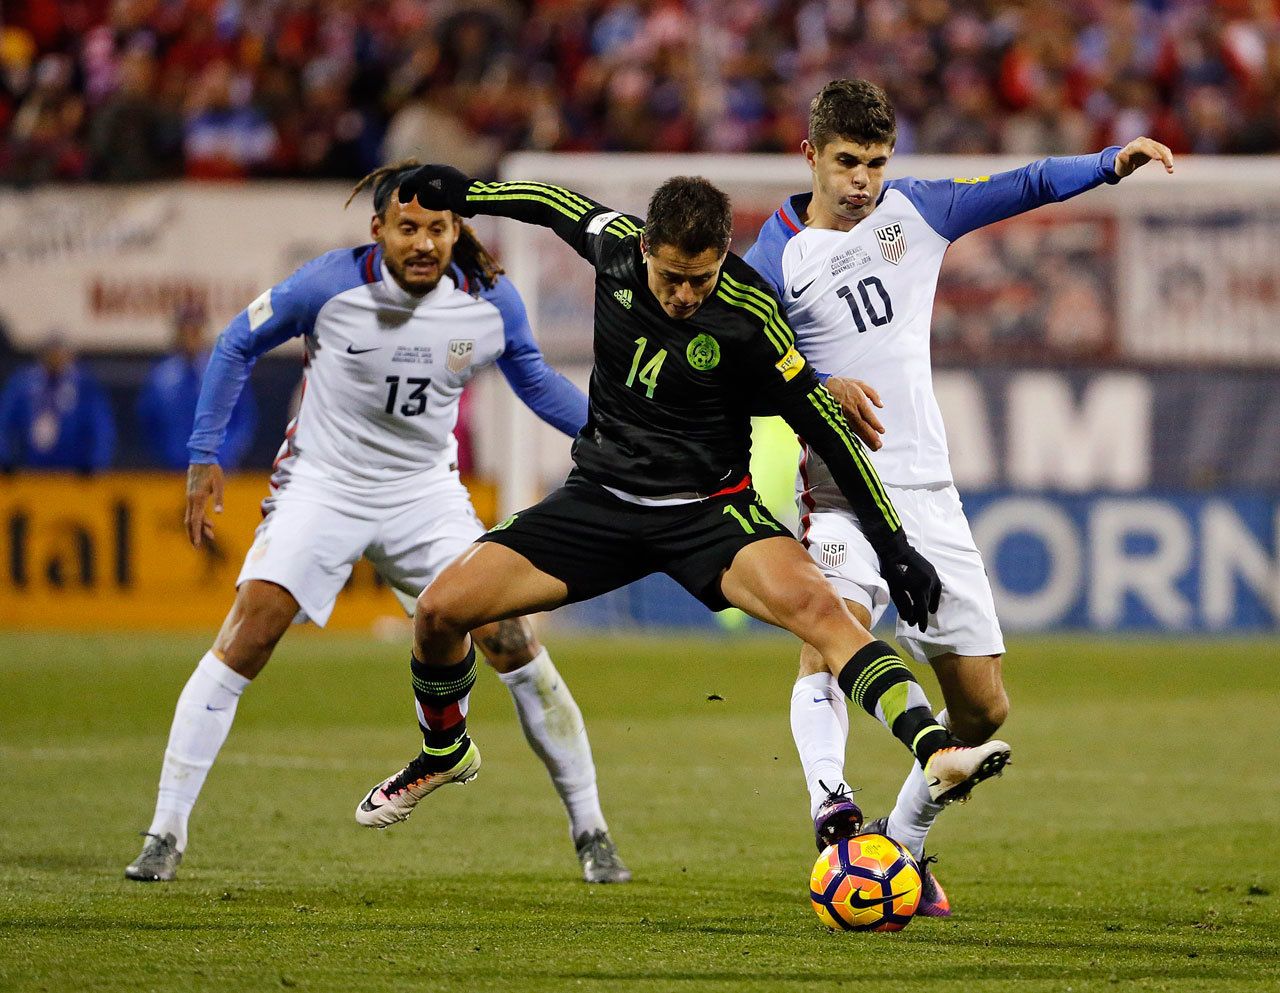 U.S. falls to Mexico, 2-1, in World Cup qualifier